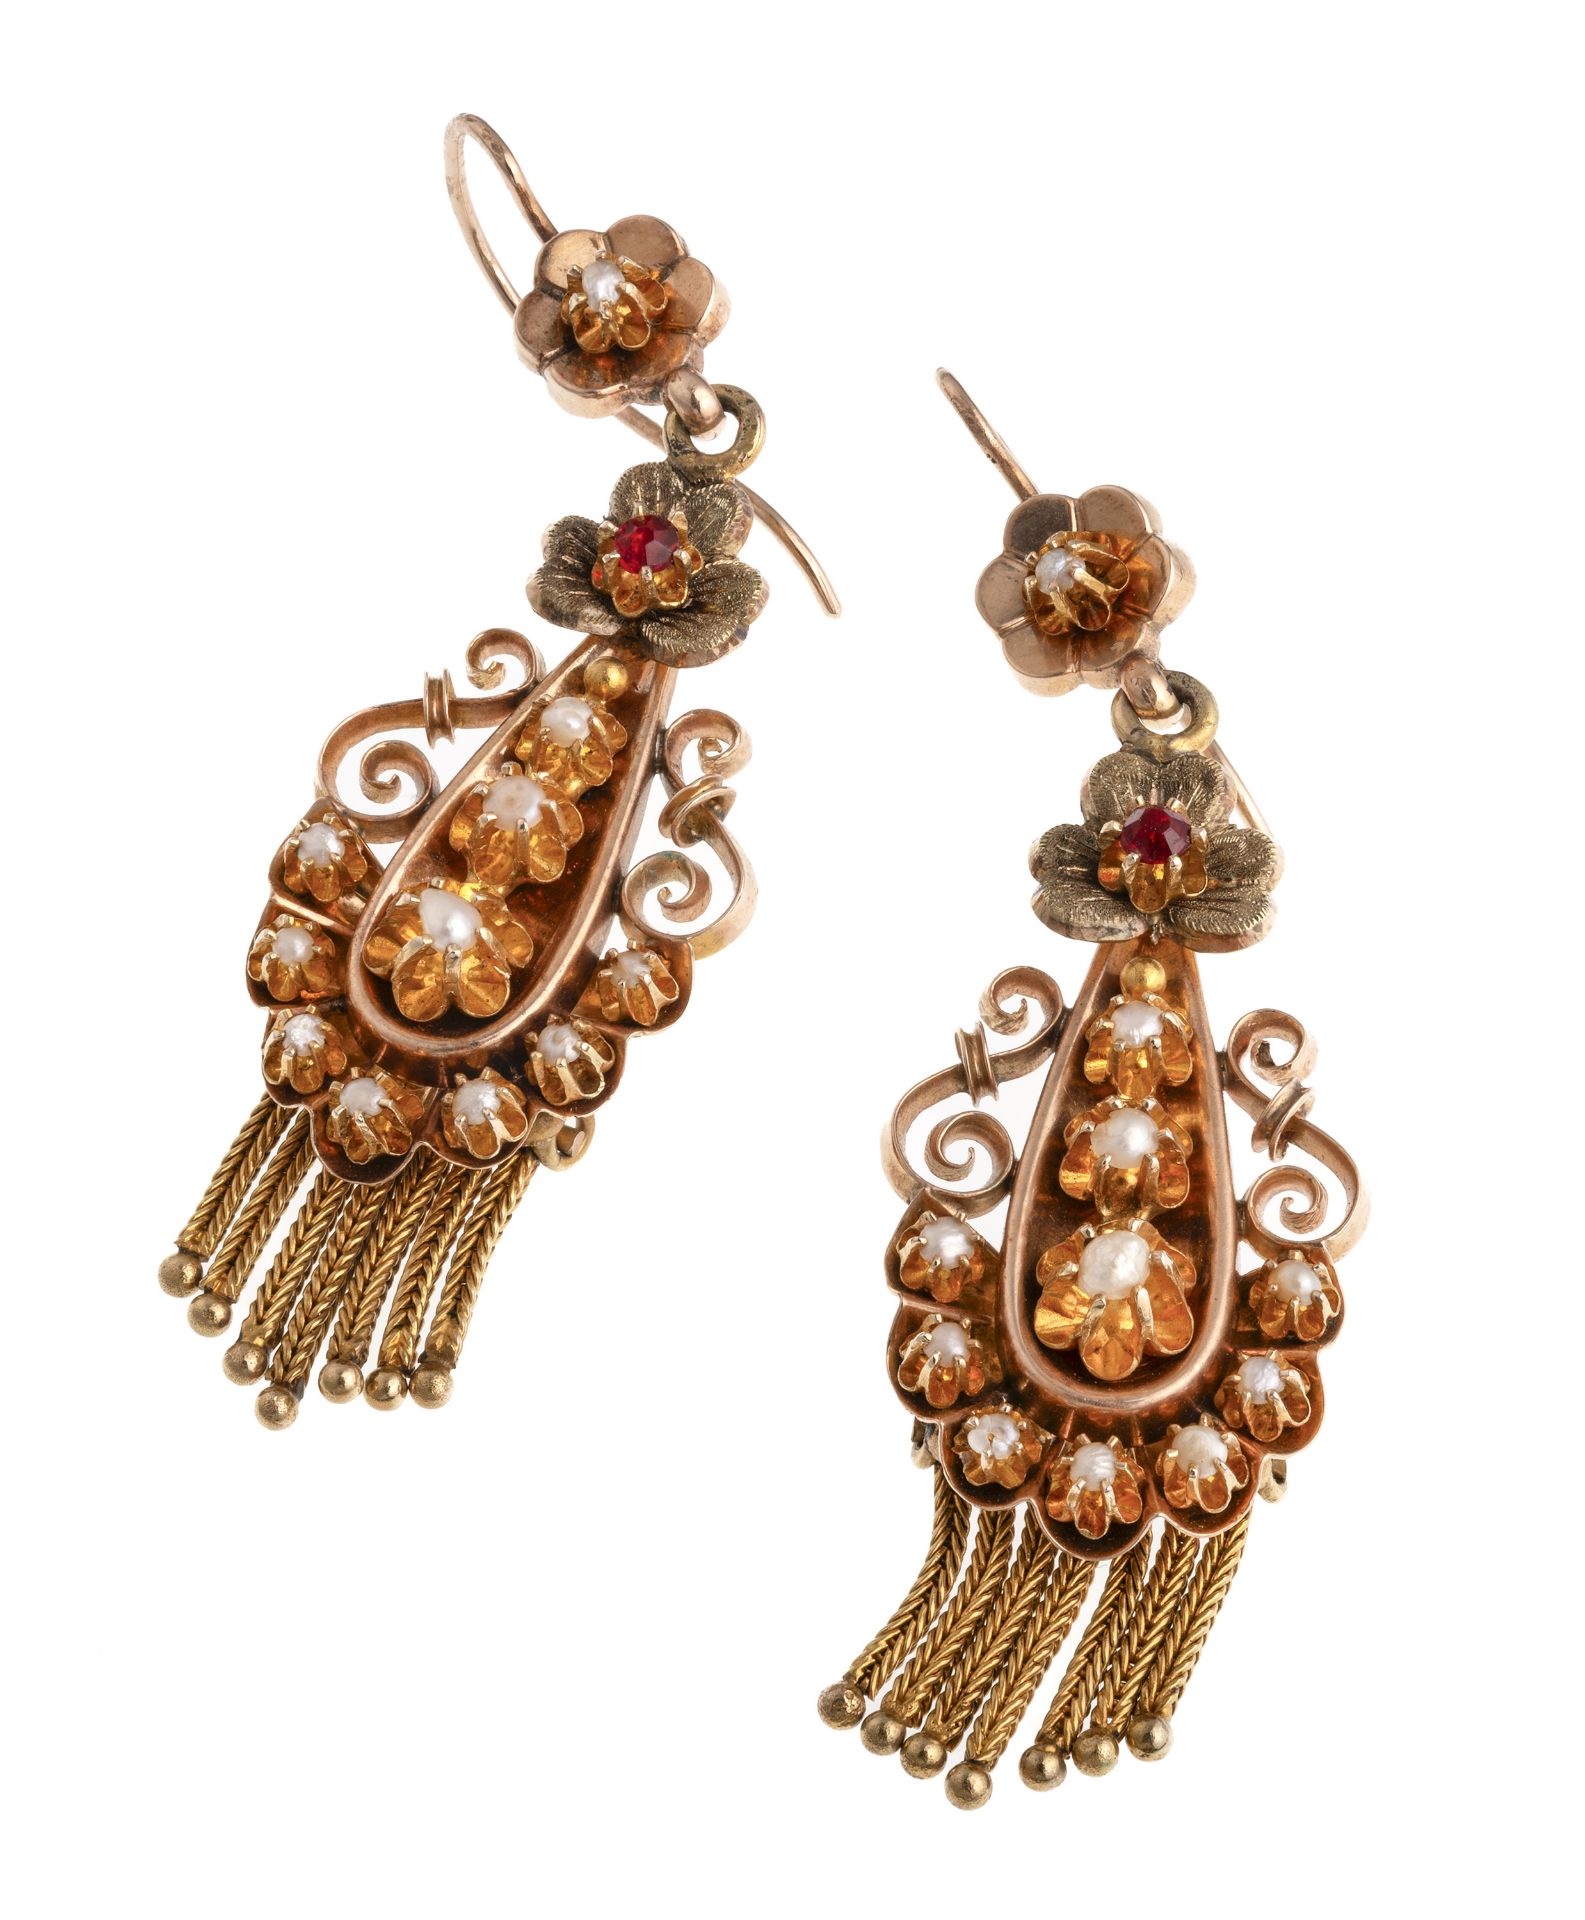 GOLD VINTAGE EARRINGS WITH GRANATES AND BEADS